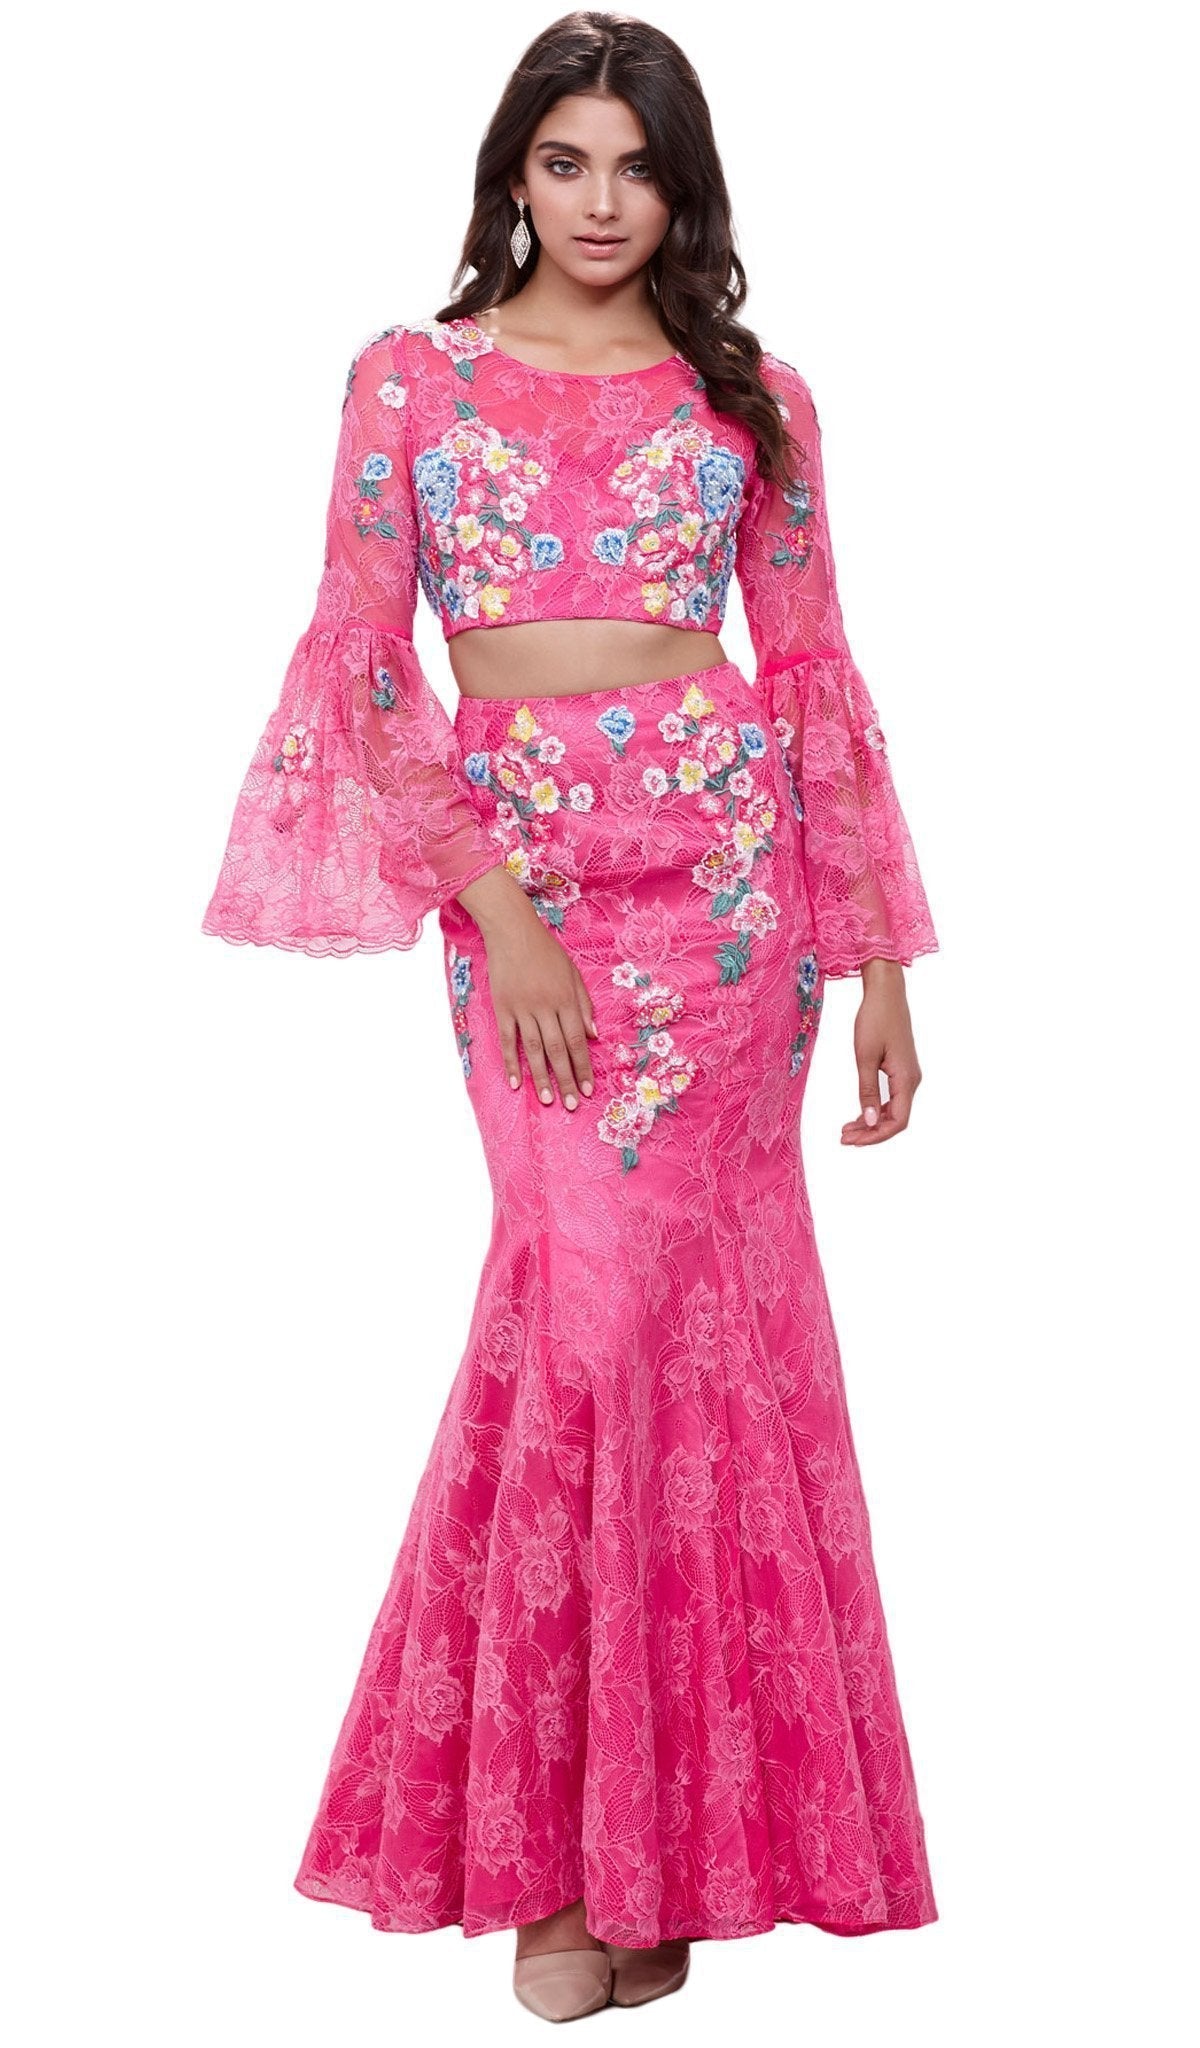 Nox Anabel - 8288 Two-Piece Embroidered Circular Flounce Sleeve Gown Special Occasion Dress XS / Fuchsia